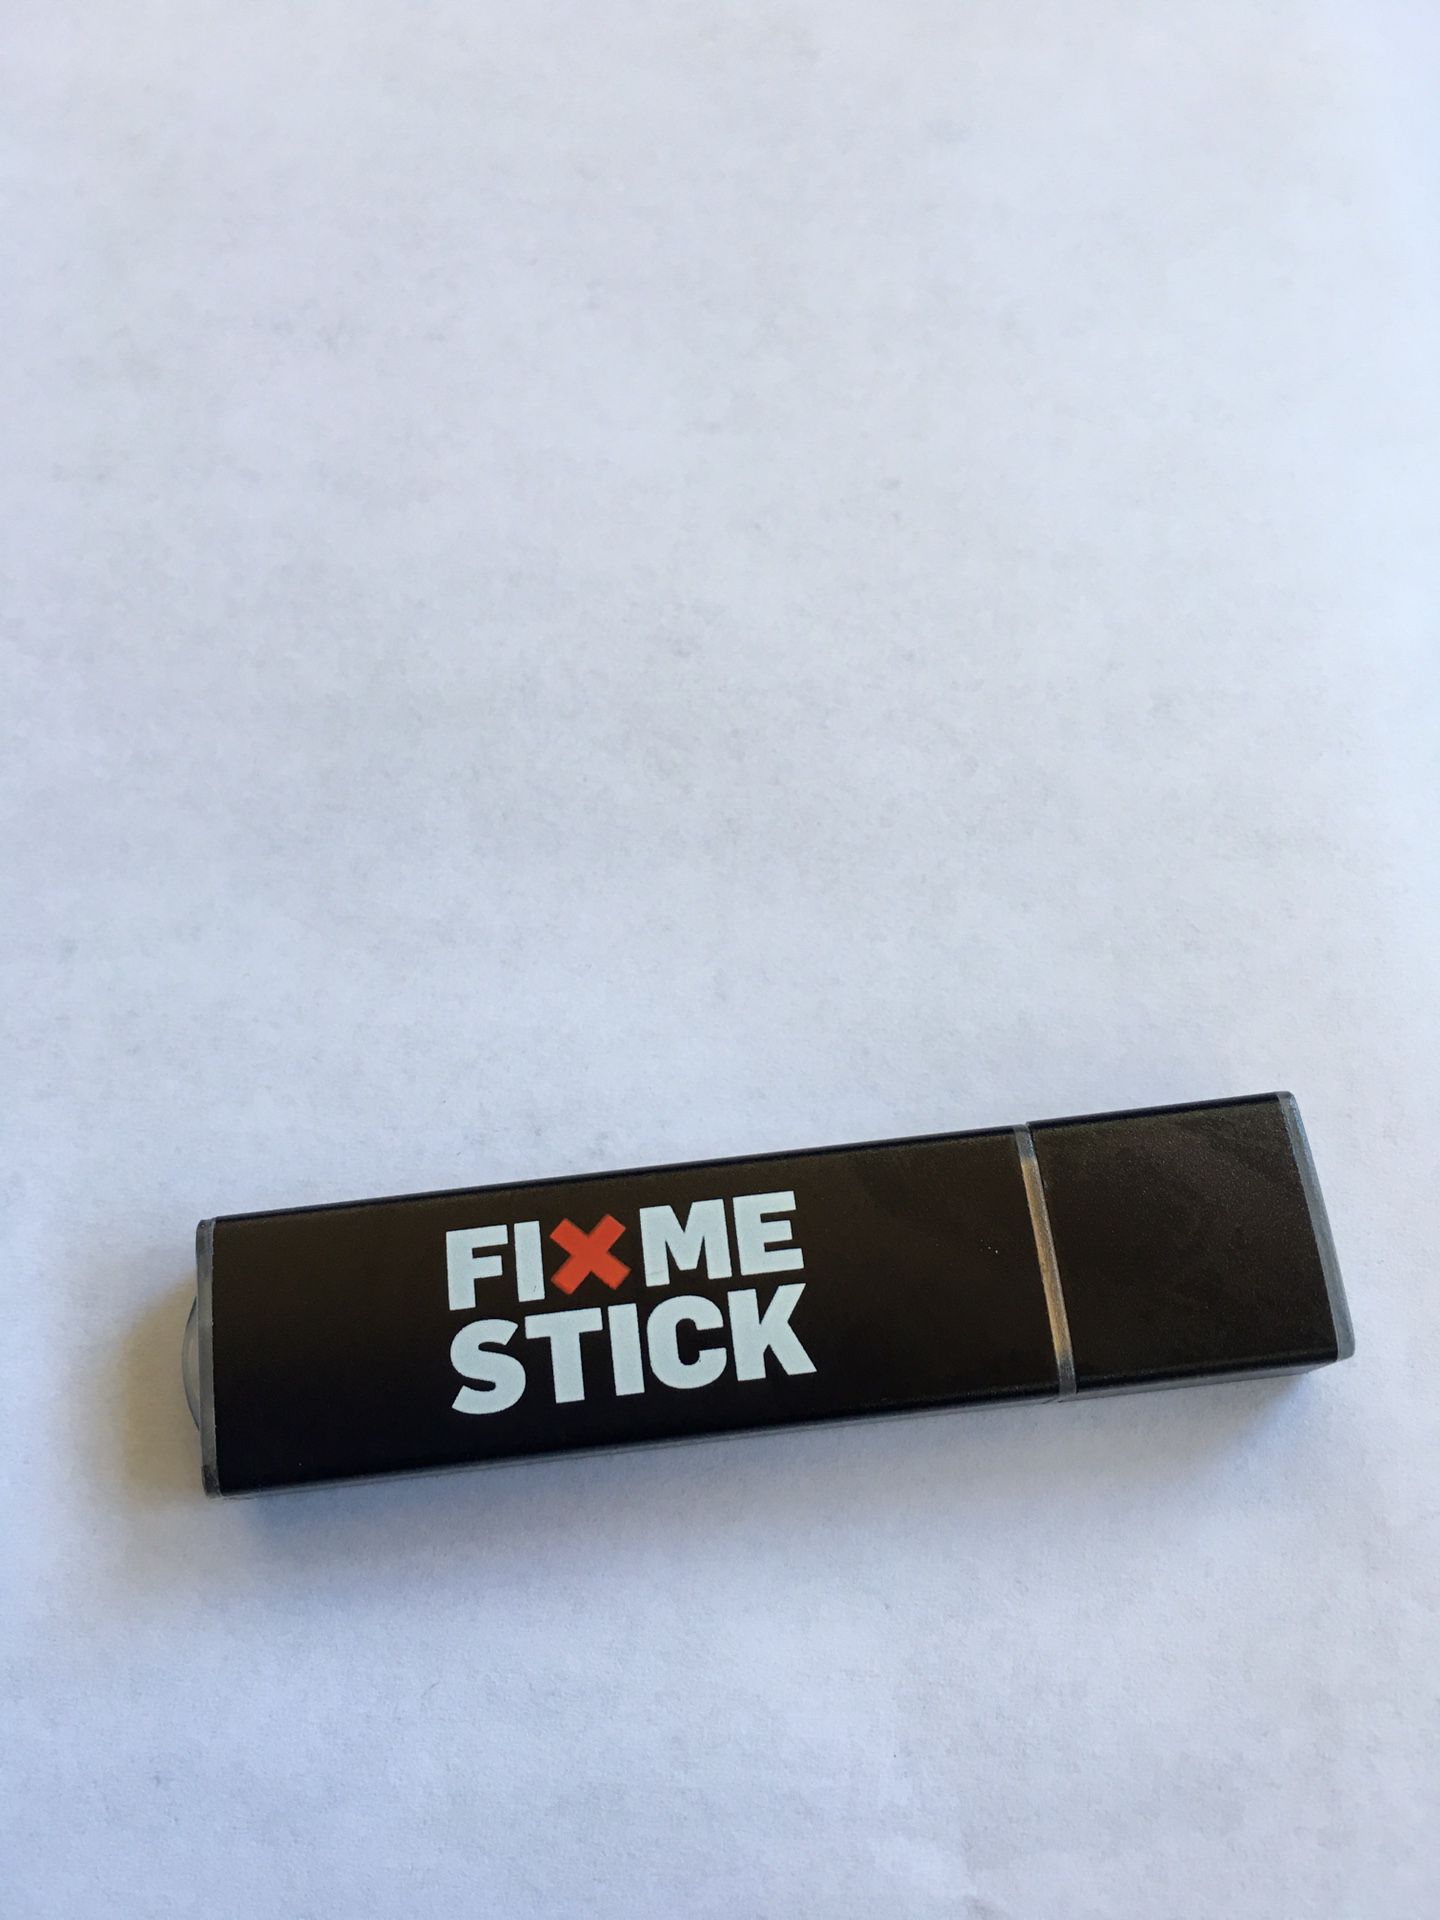 FixMeStick for PC and Apple Computers Virus Remover